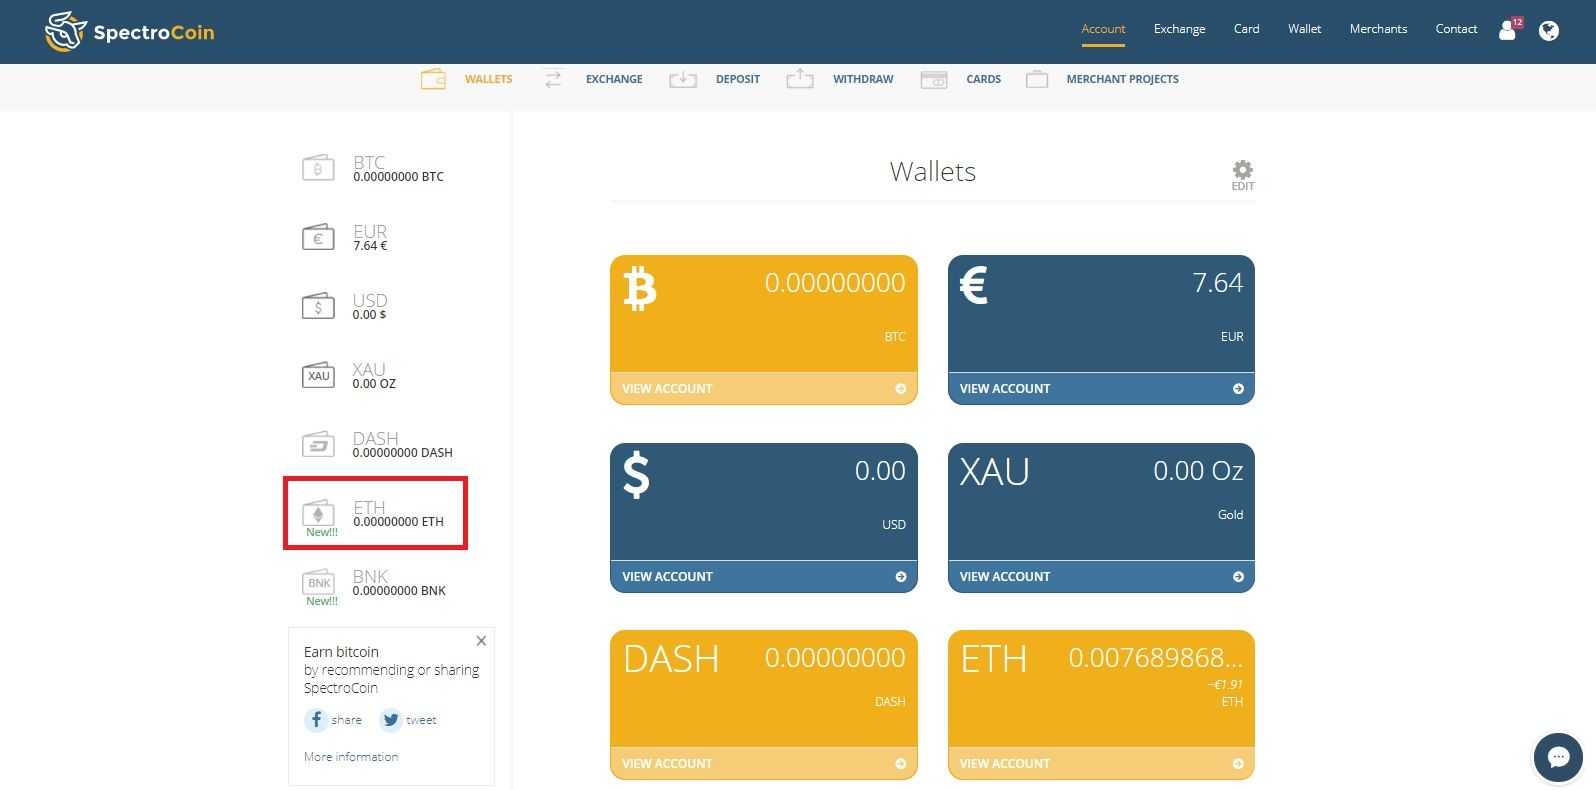 SpectroCoin account section with highlighted ETH wallet